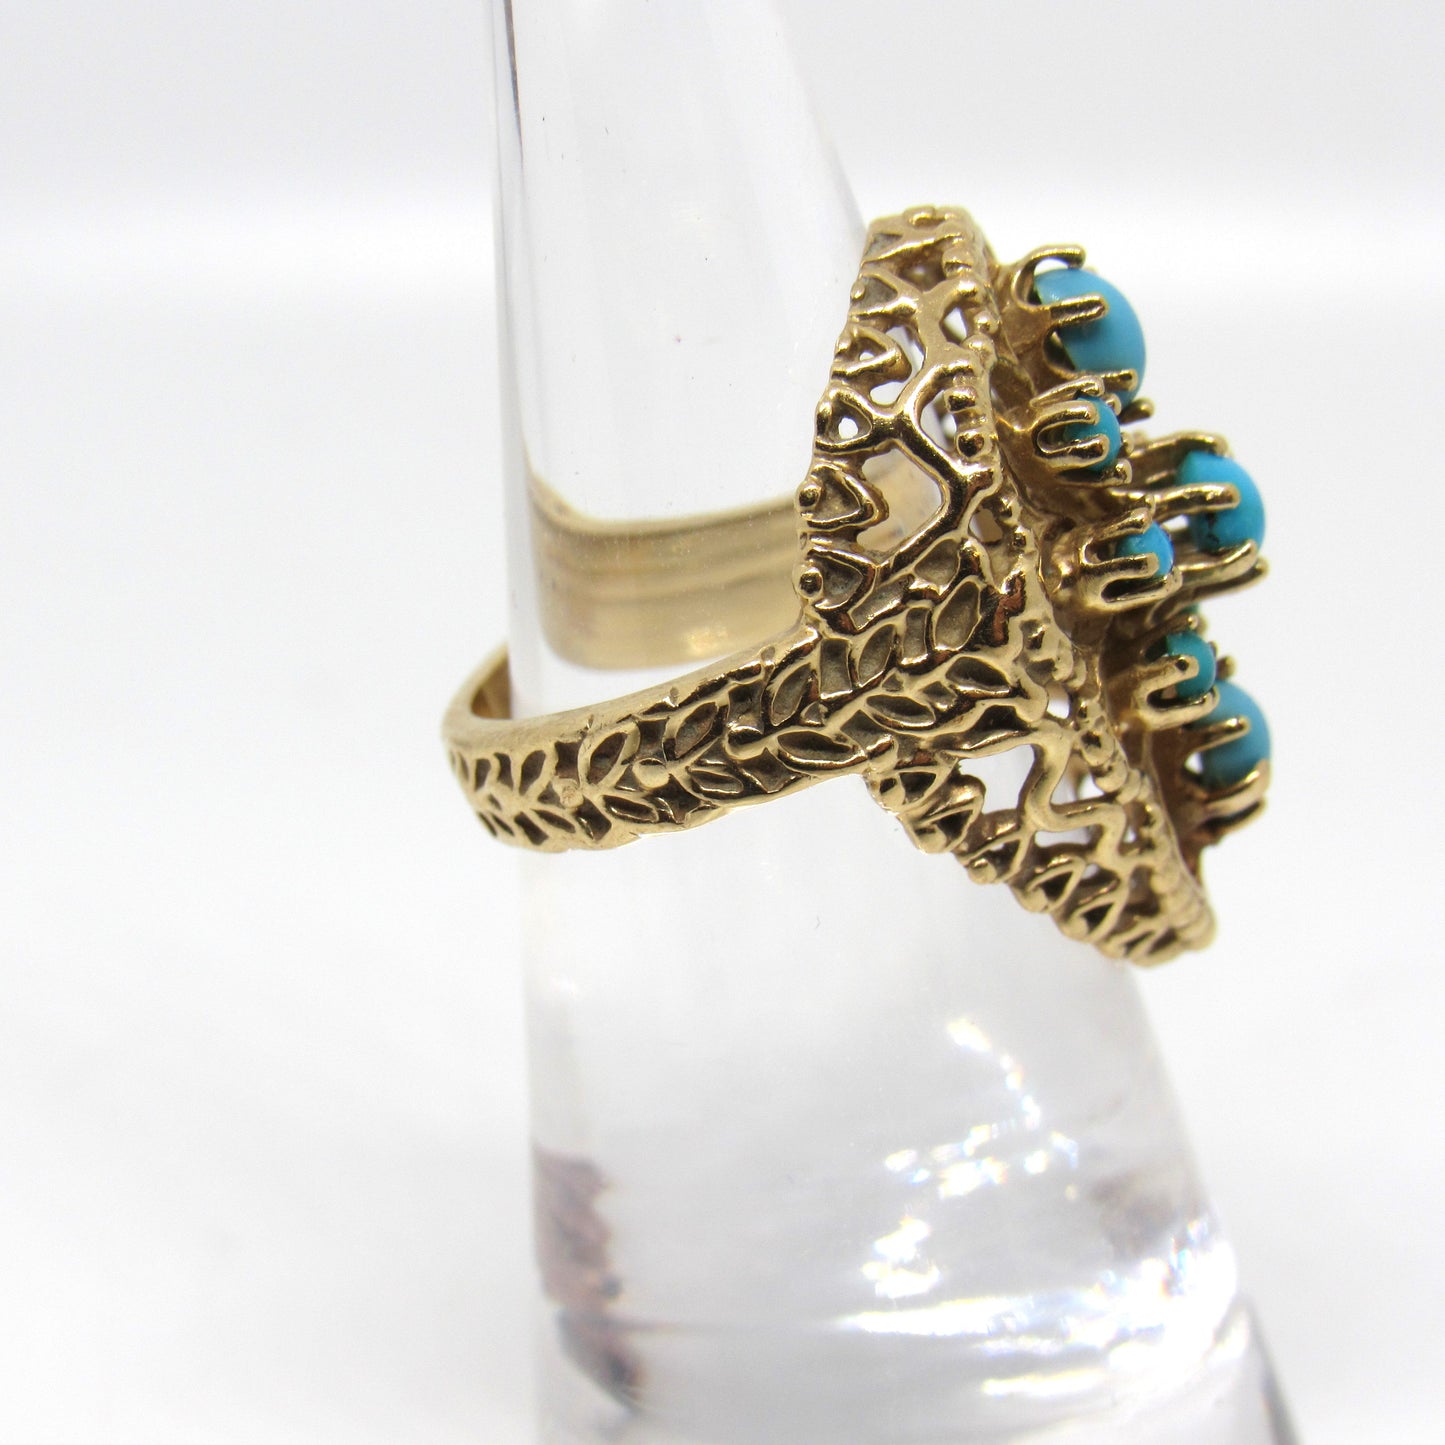 Vintage 14k Yellow Gold Turquoise Domed Openwork Statement Ring - Sz 4.75